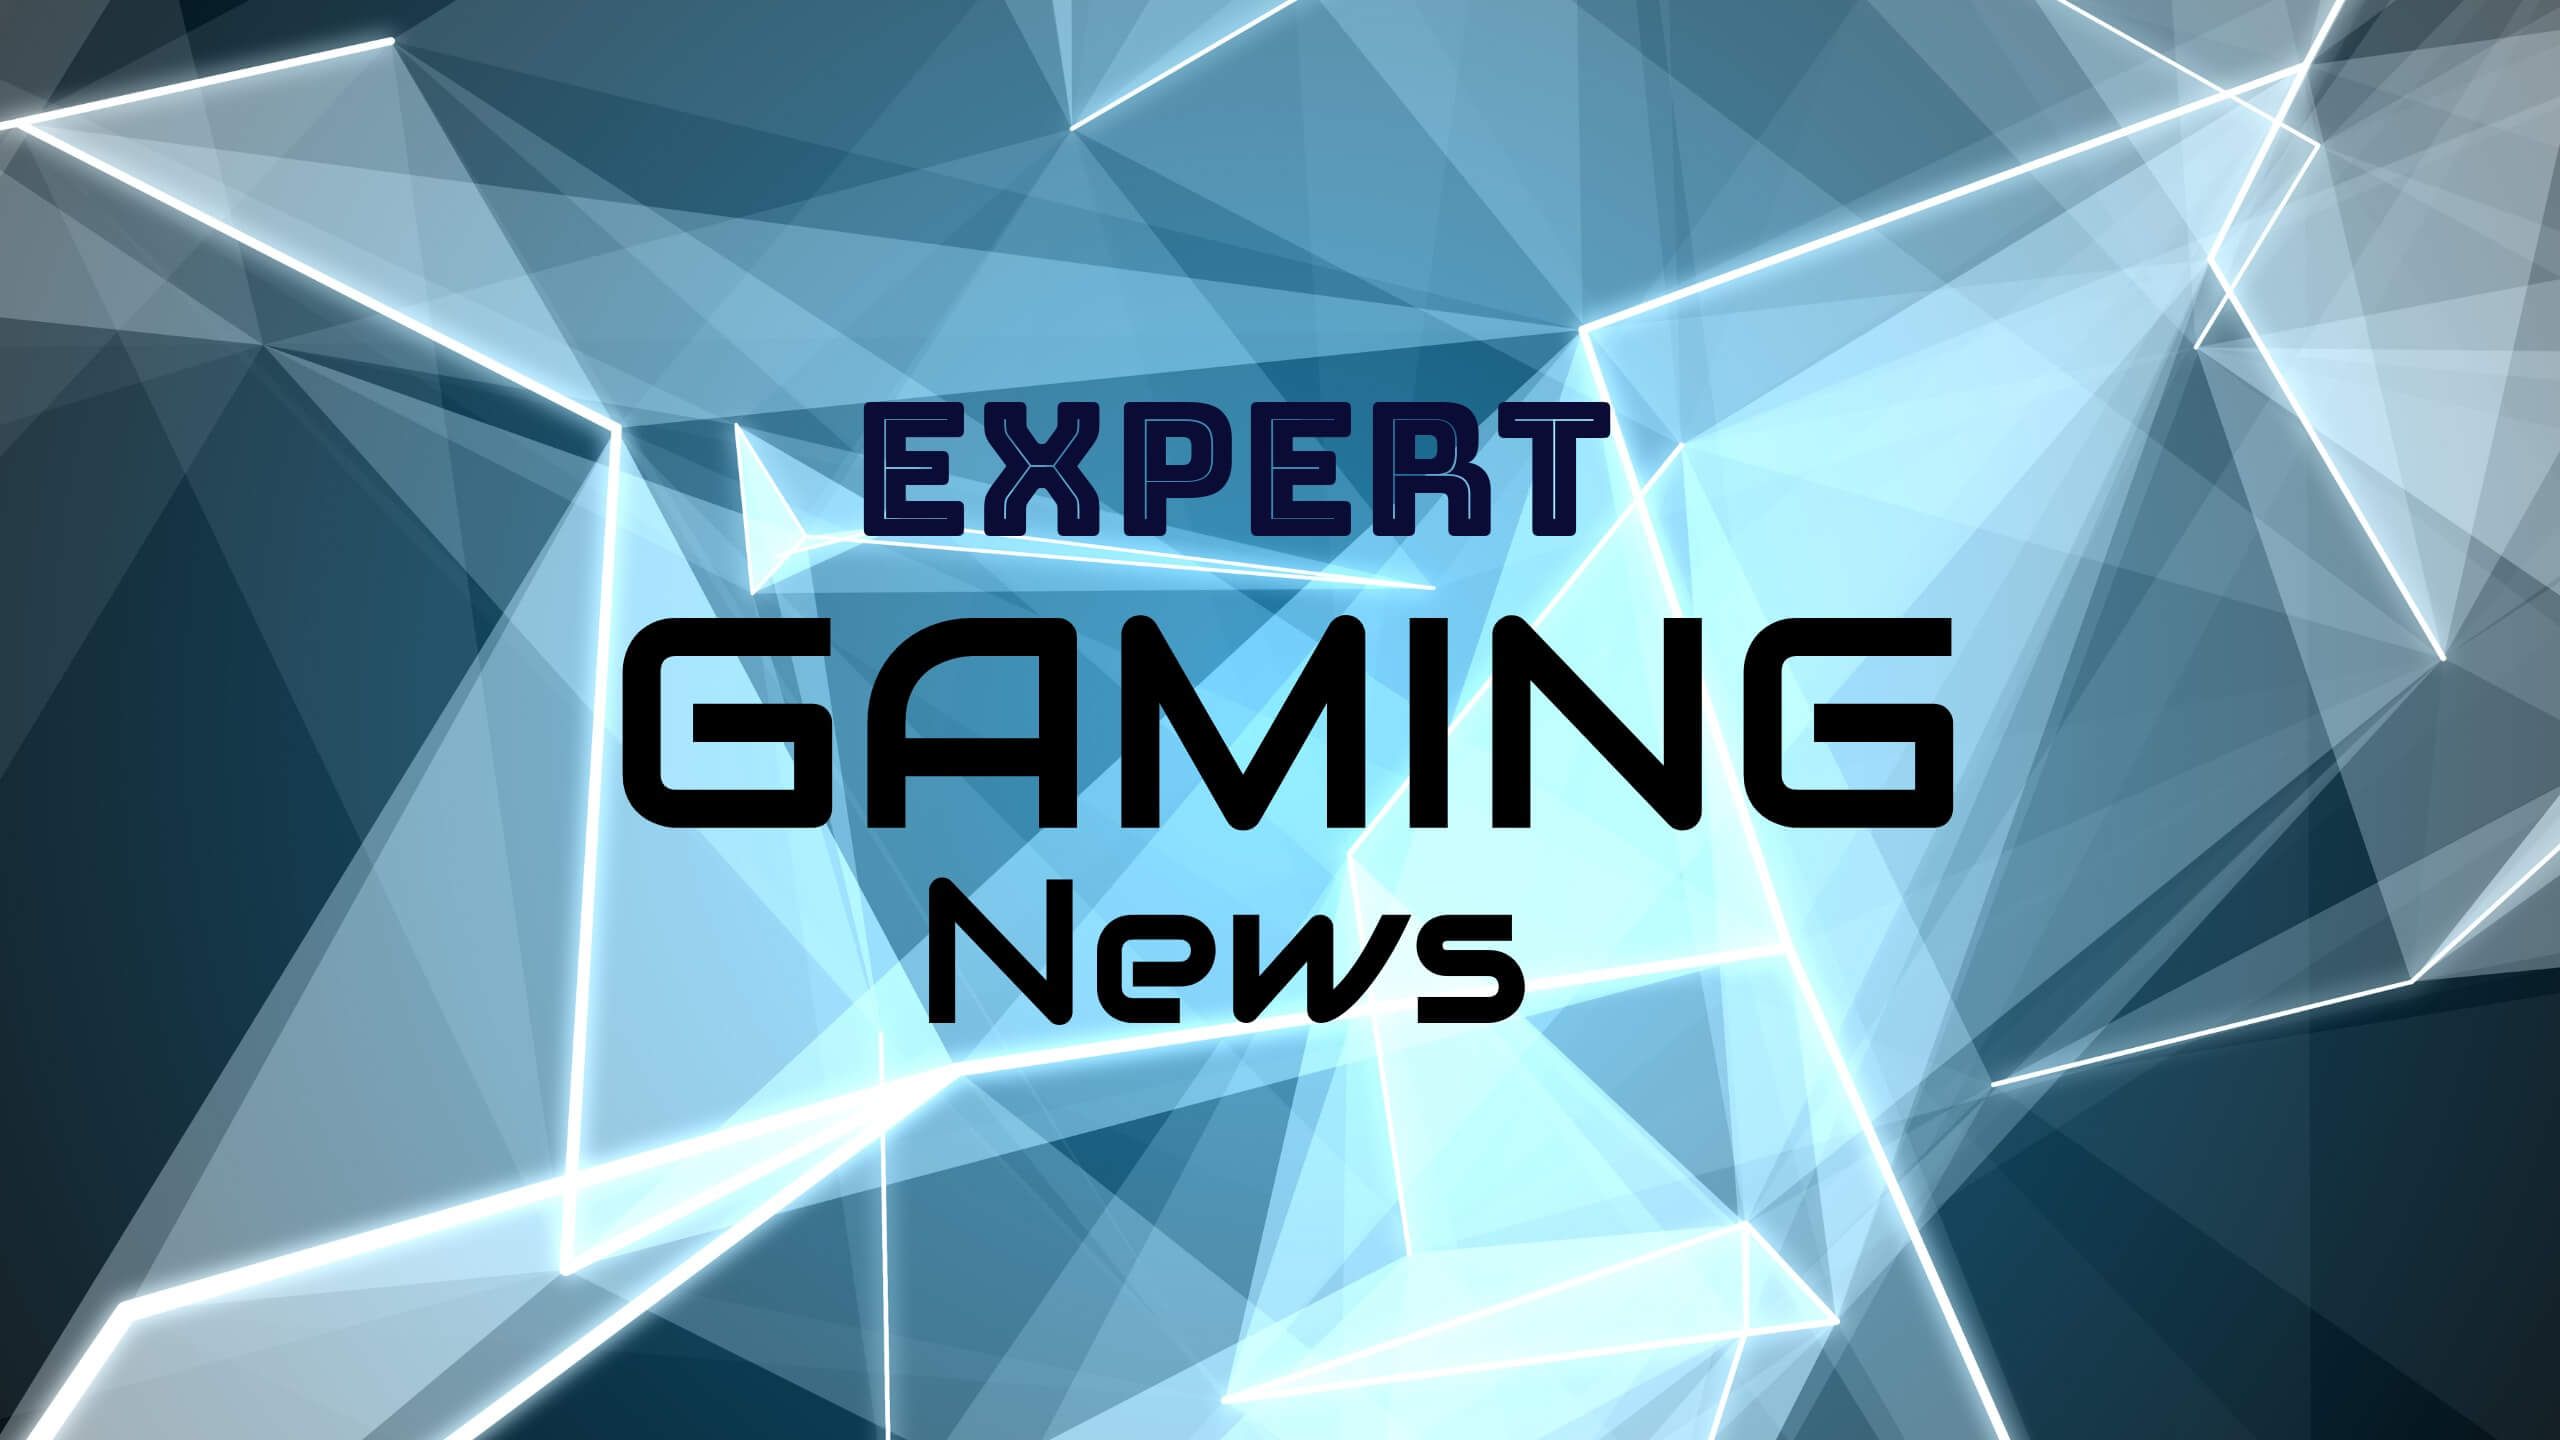 Expert gaming news on blue background with shapes - Ideas for gaming news YouTube channel - Image